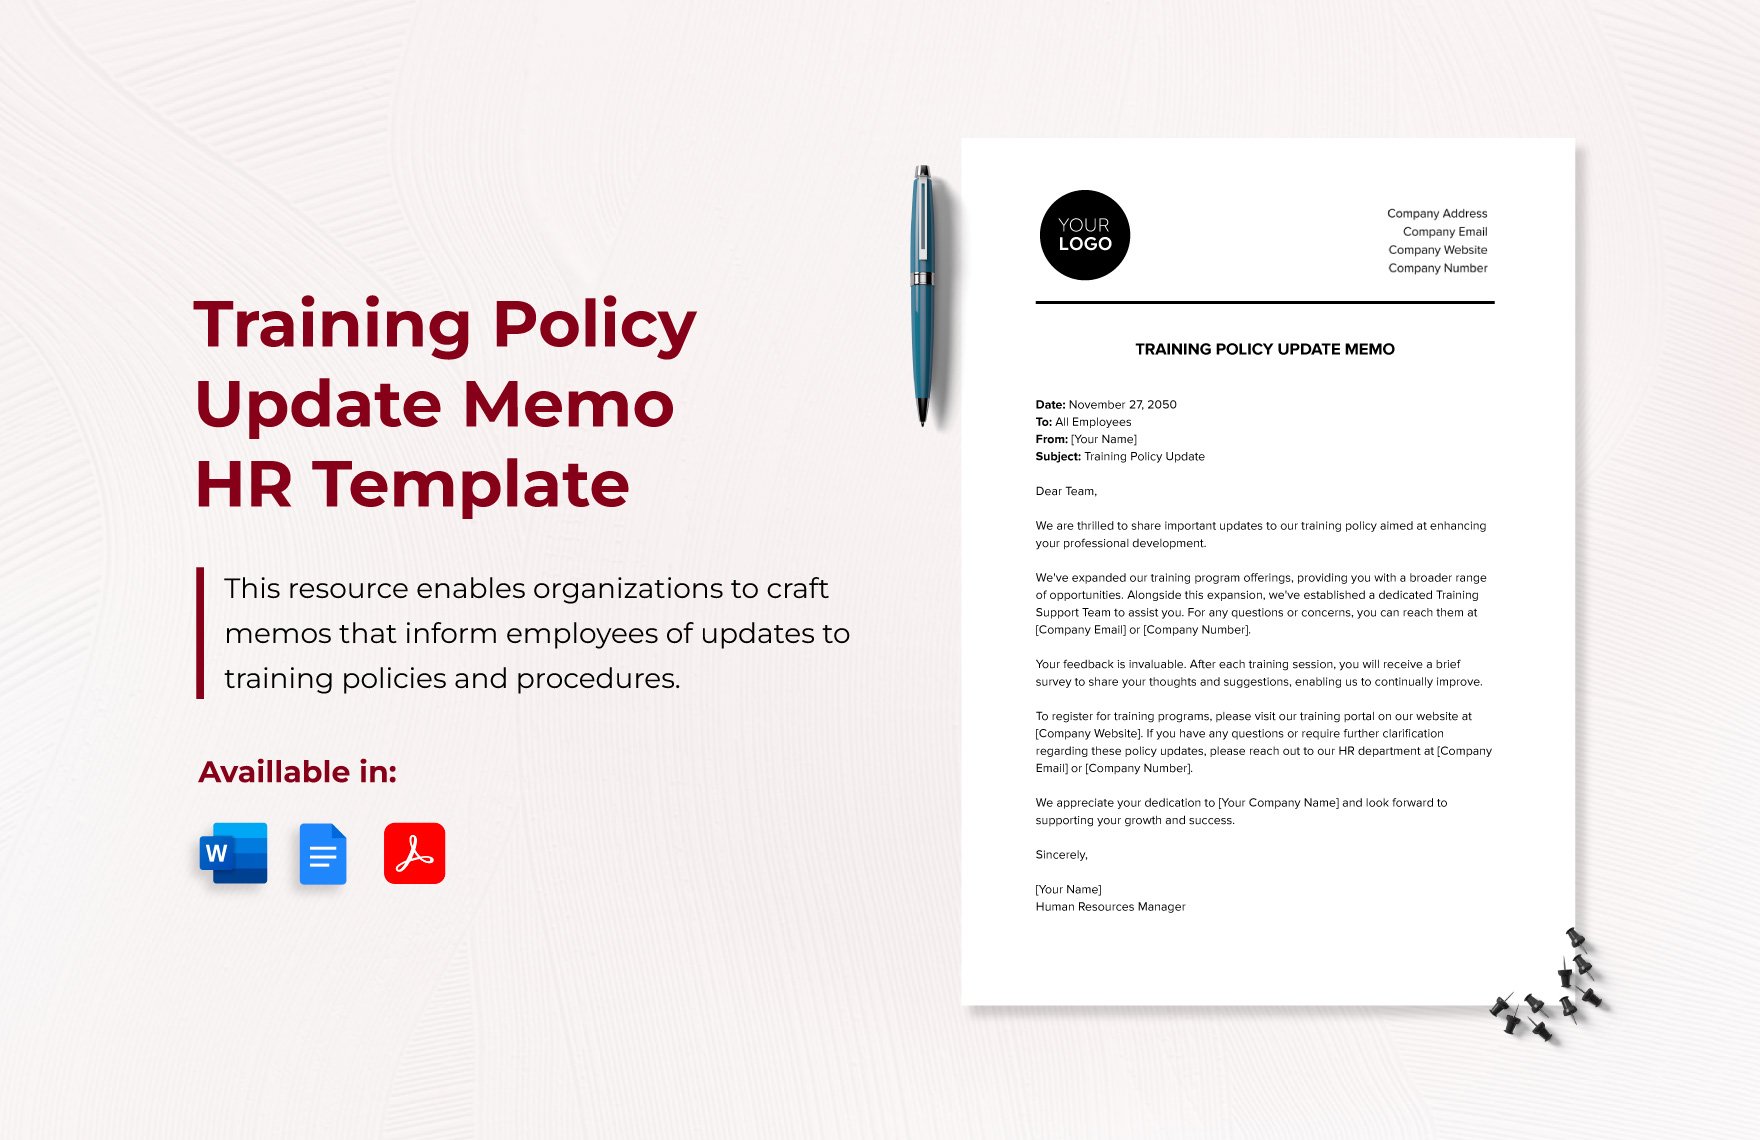 Training Policy Update Memo HR Template